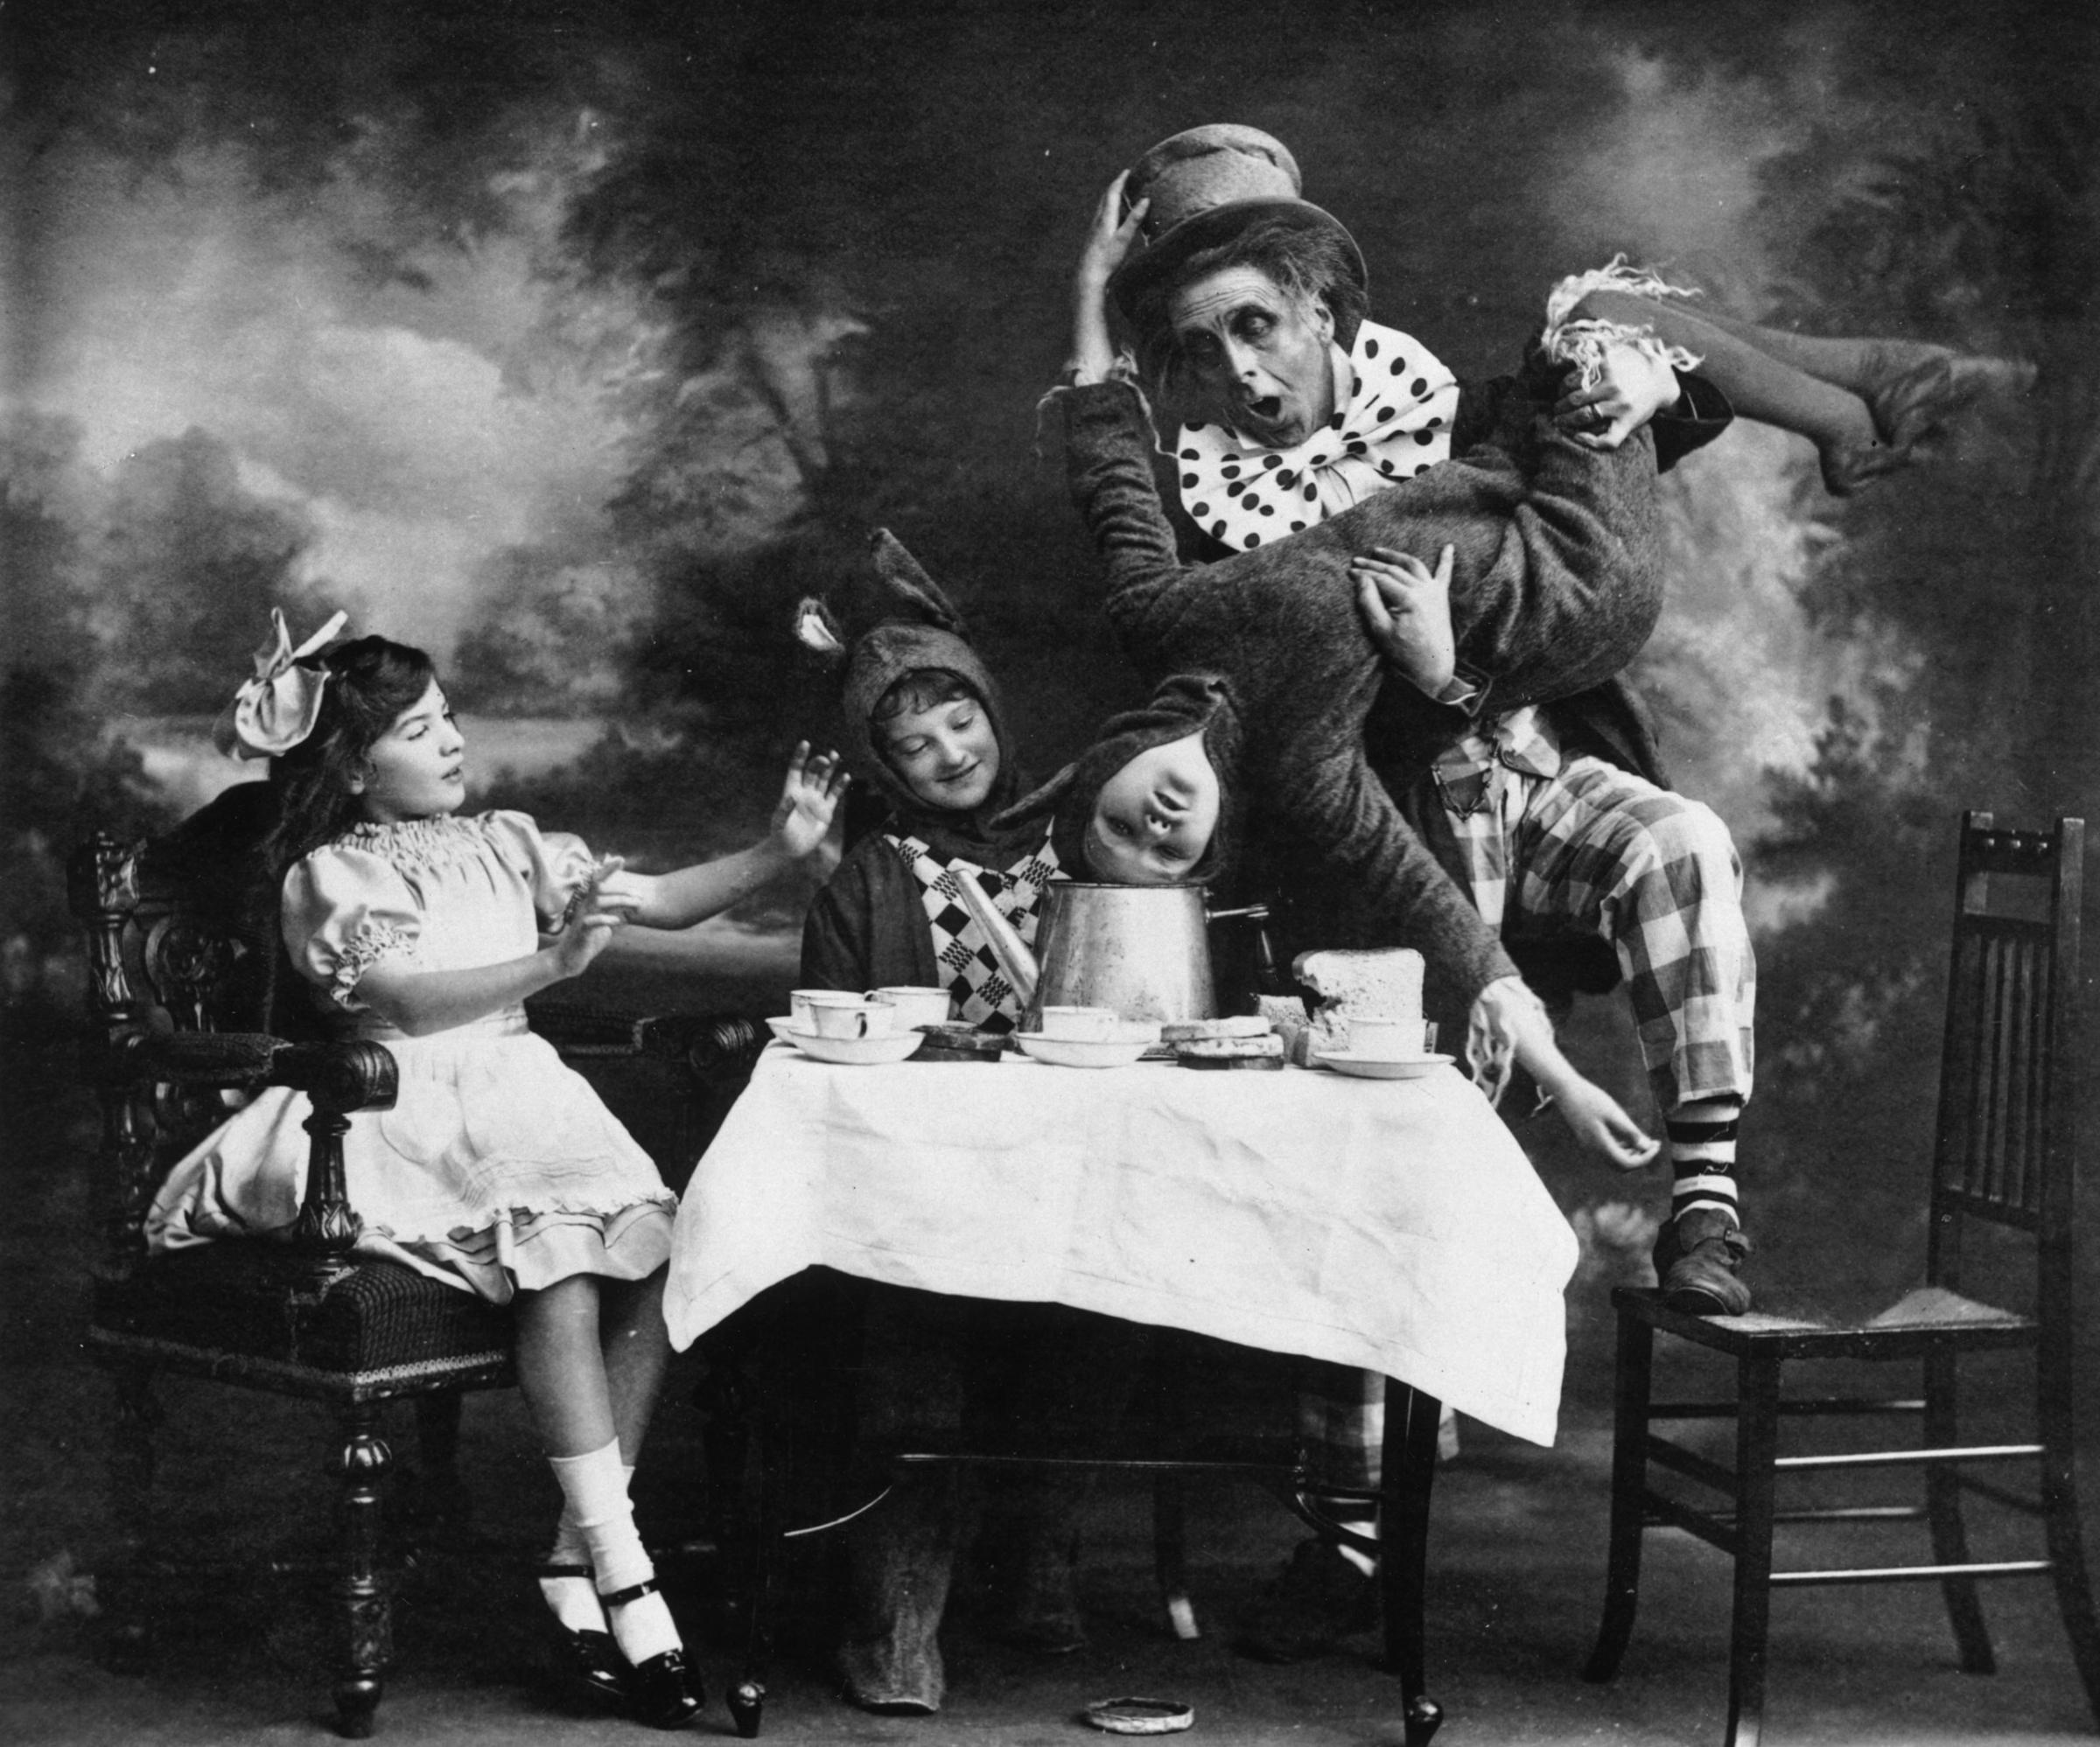 circa 1910: The Mad Hatter's tea party, a scene from a London theatre production of 'Alice In Wonderland'.